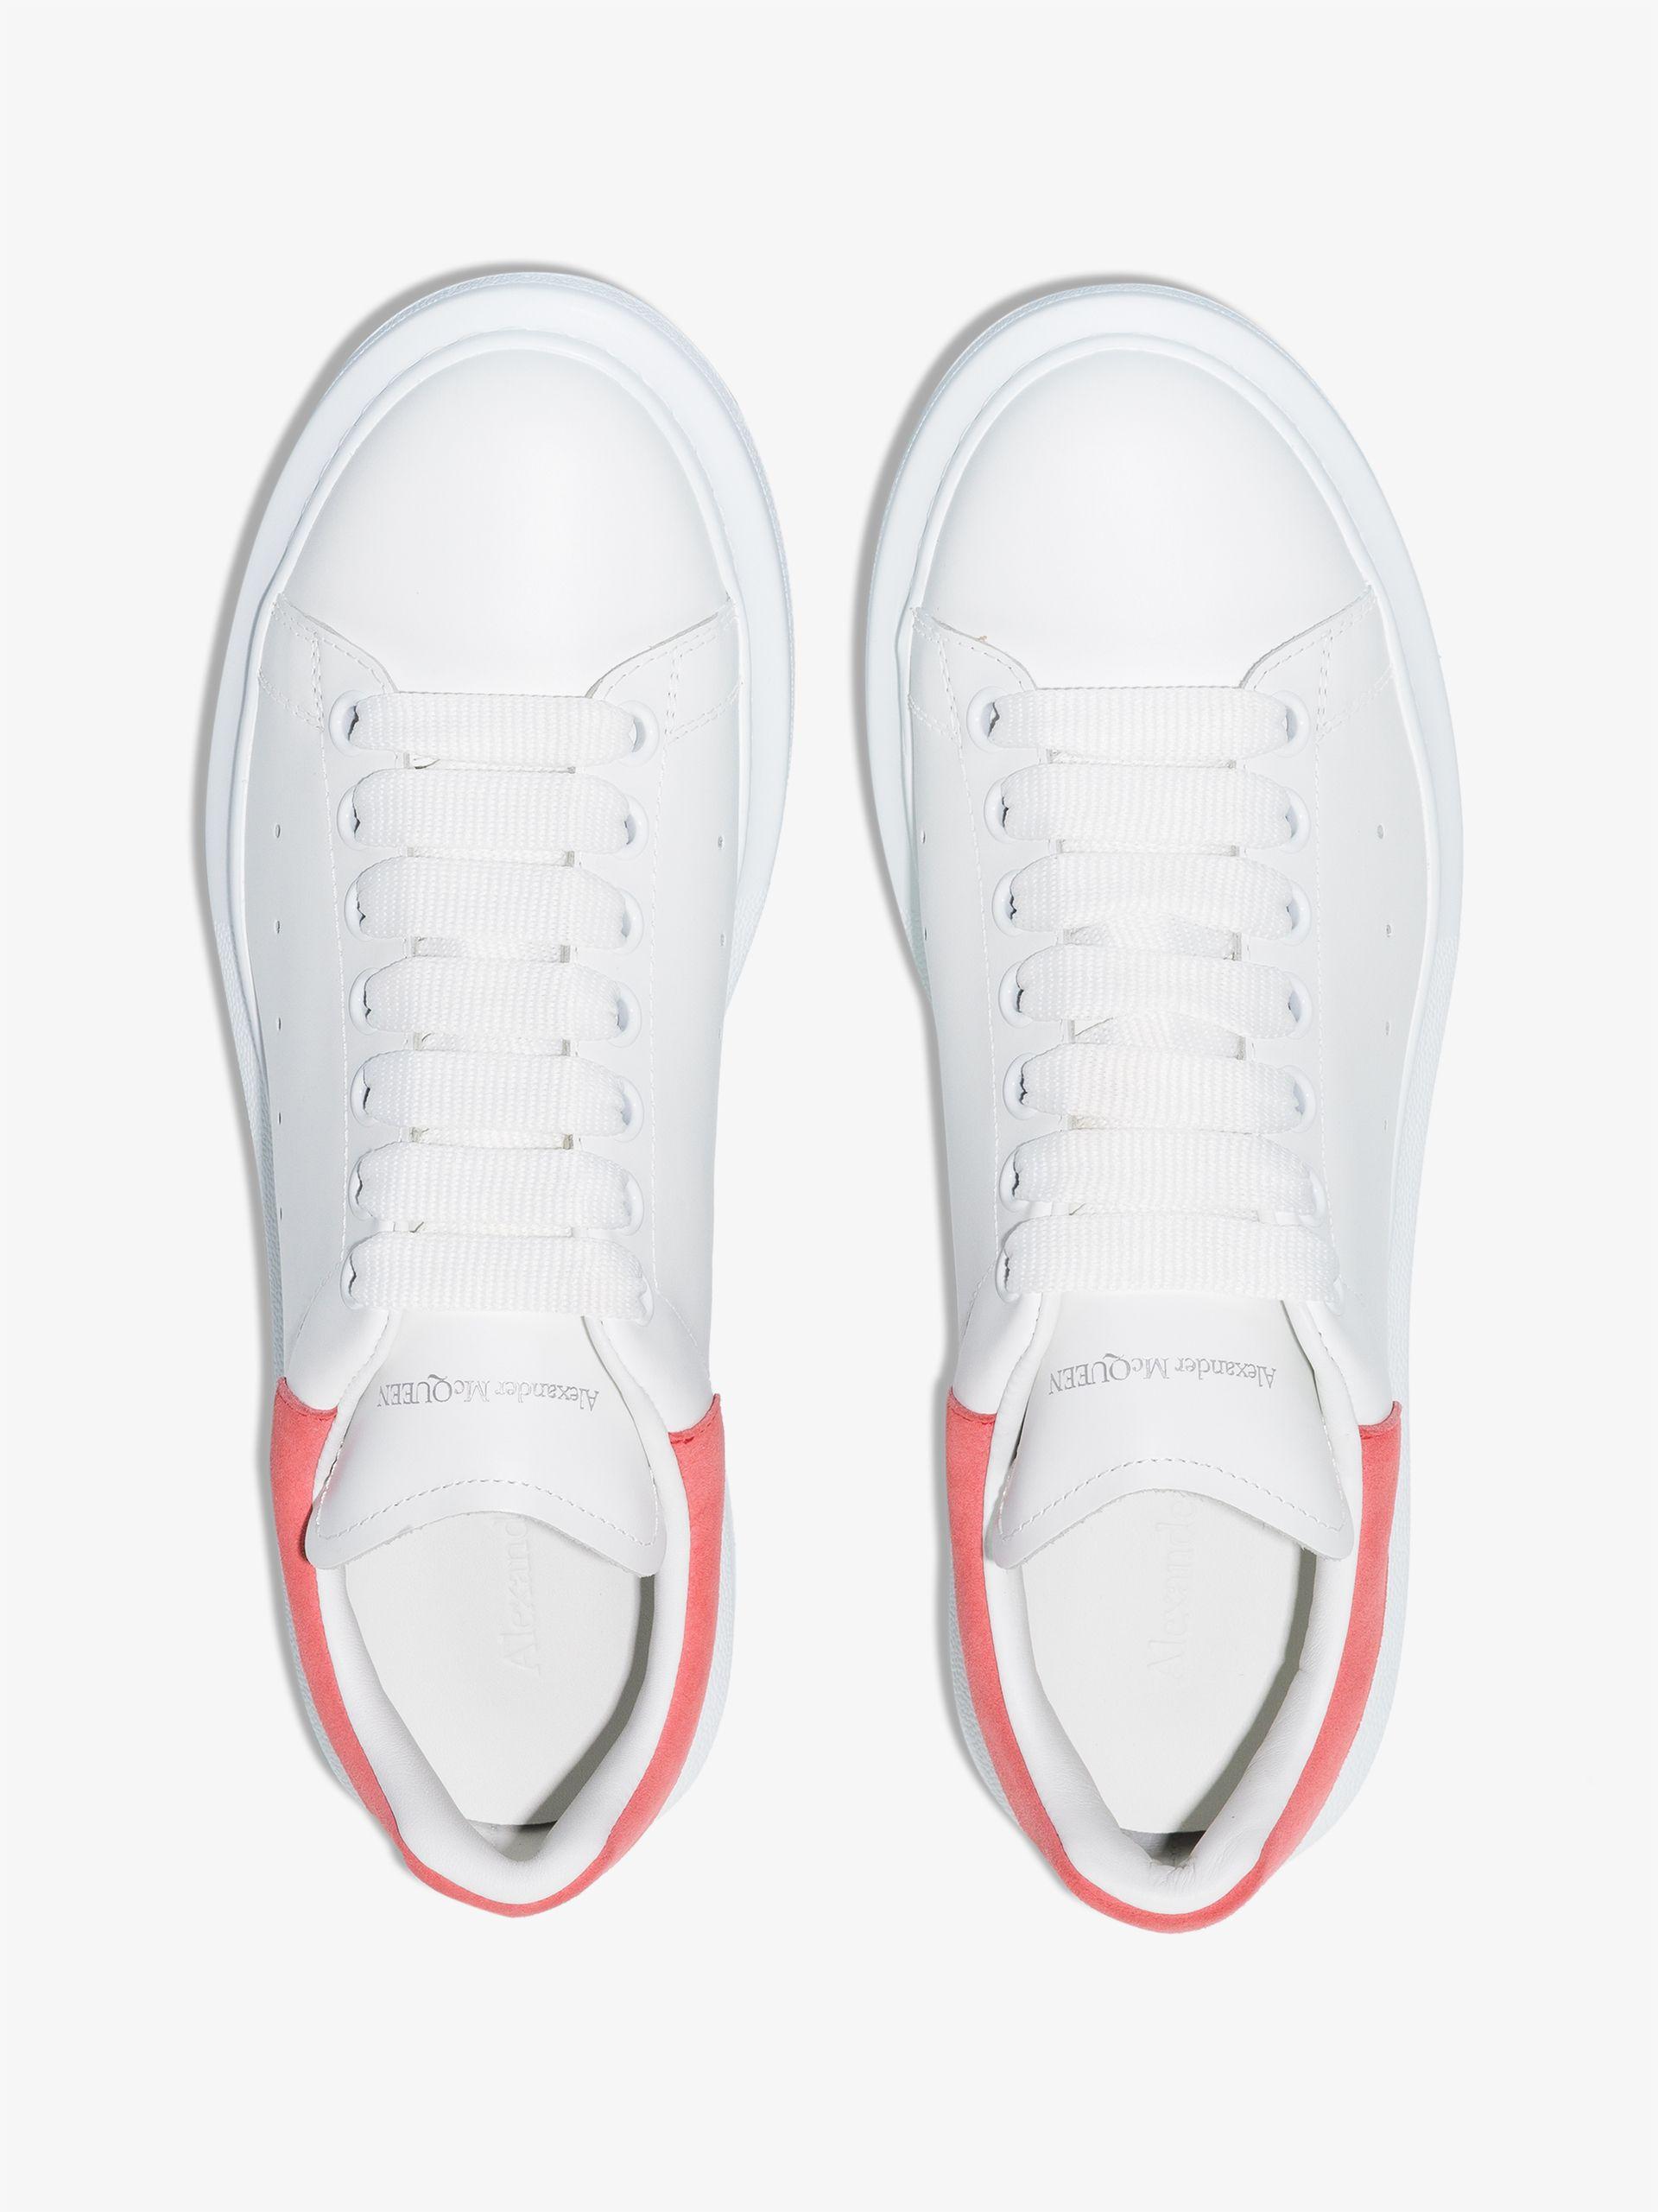 Alexander McQueen And Coral Oversized Sneakers in White | Lyst